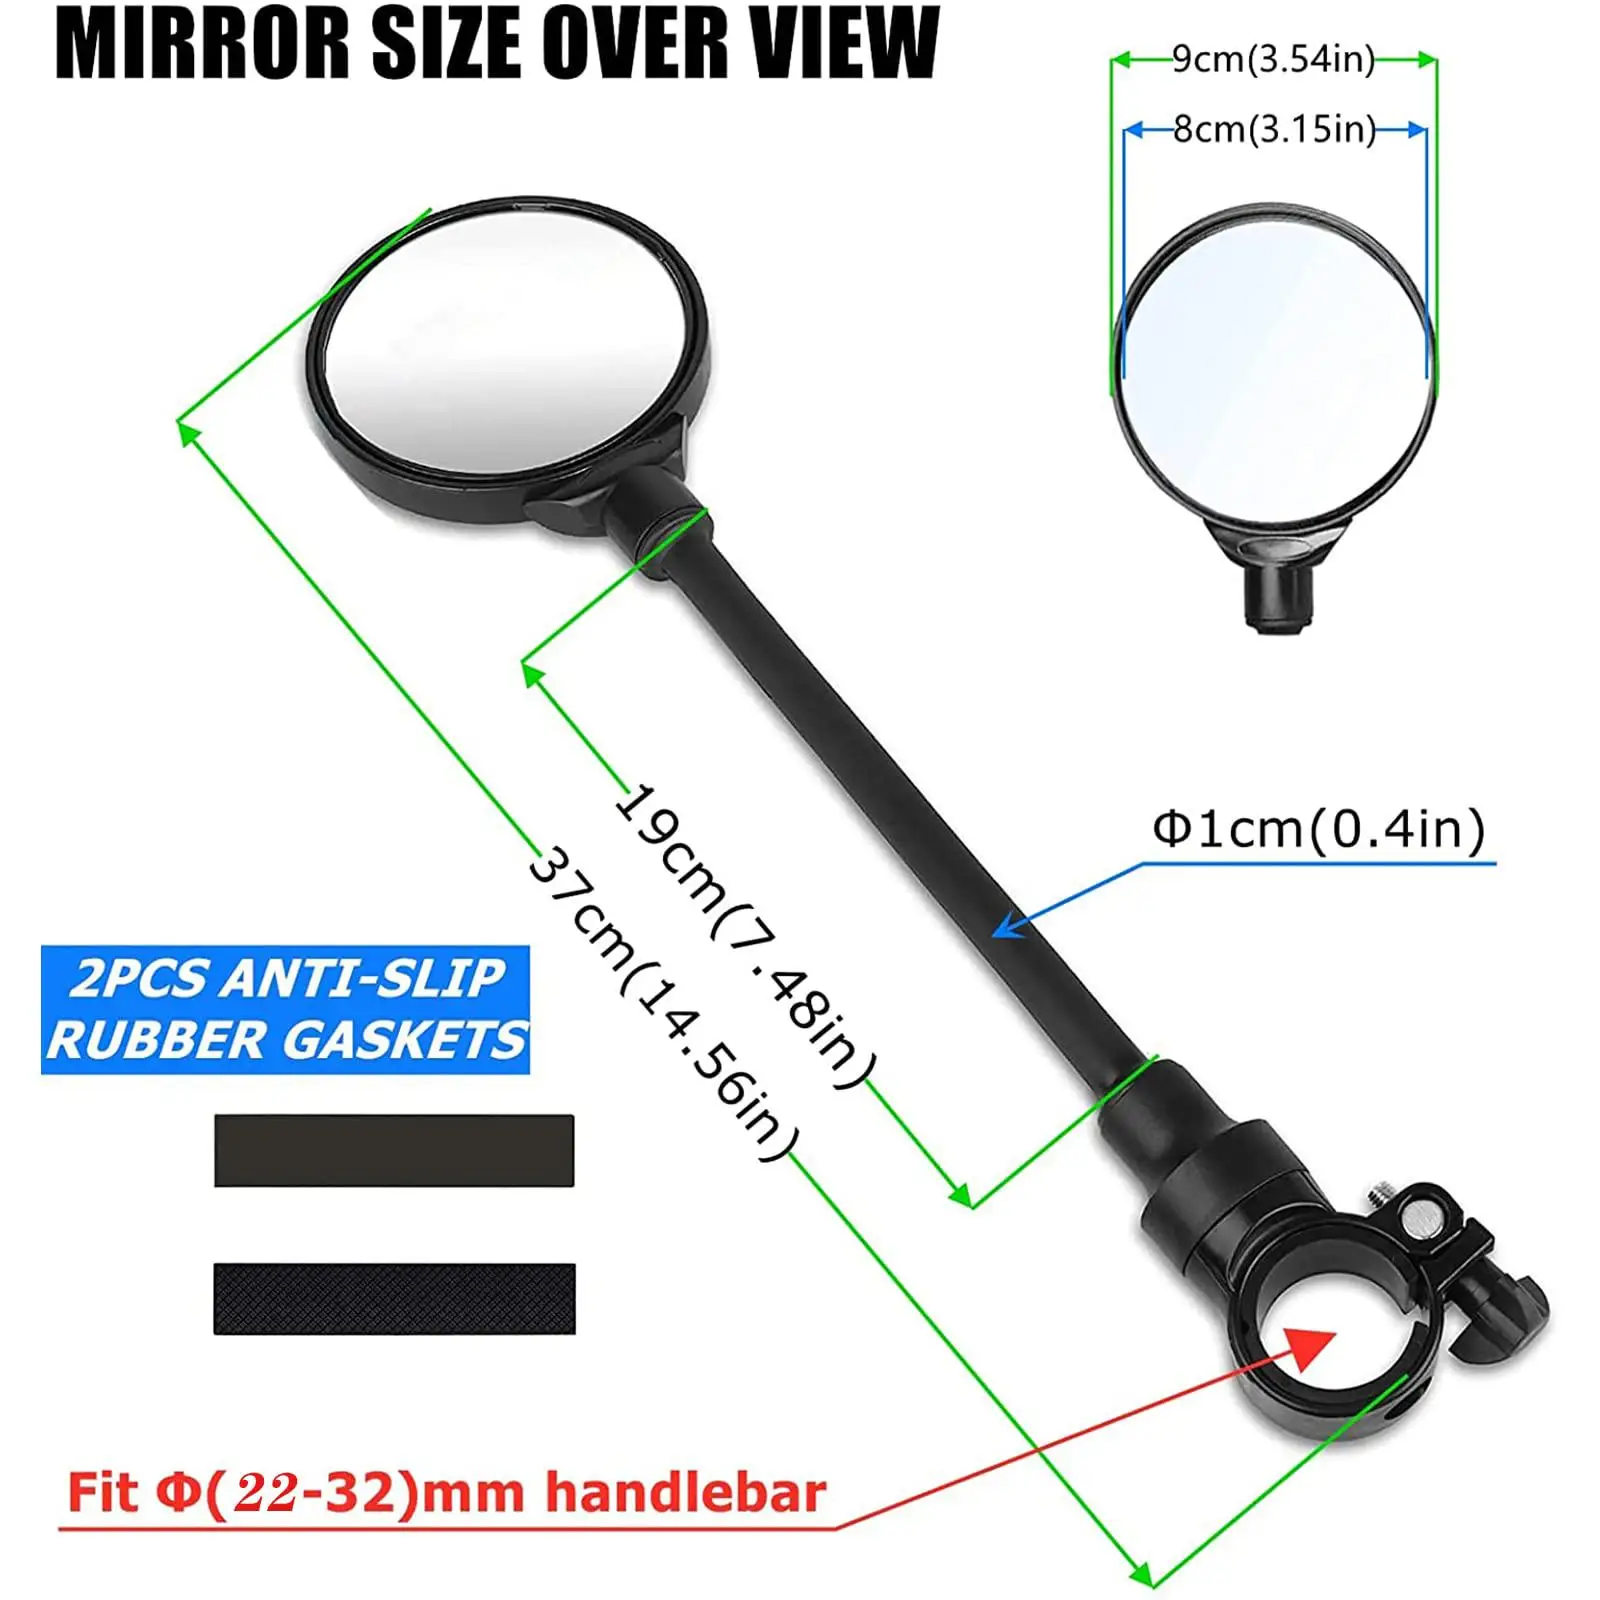  Convex Mirror Rotatable Handlebar Mounted for Handlebars 22- mm Easily Install Wide  Built in  Tube Shockproof